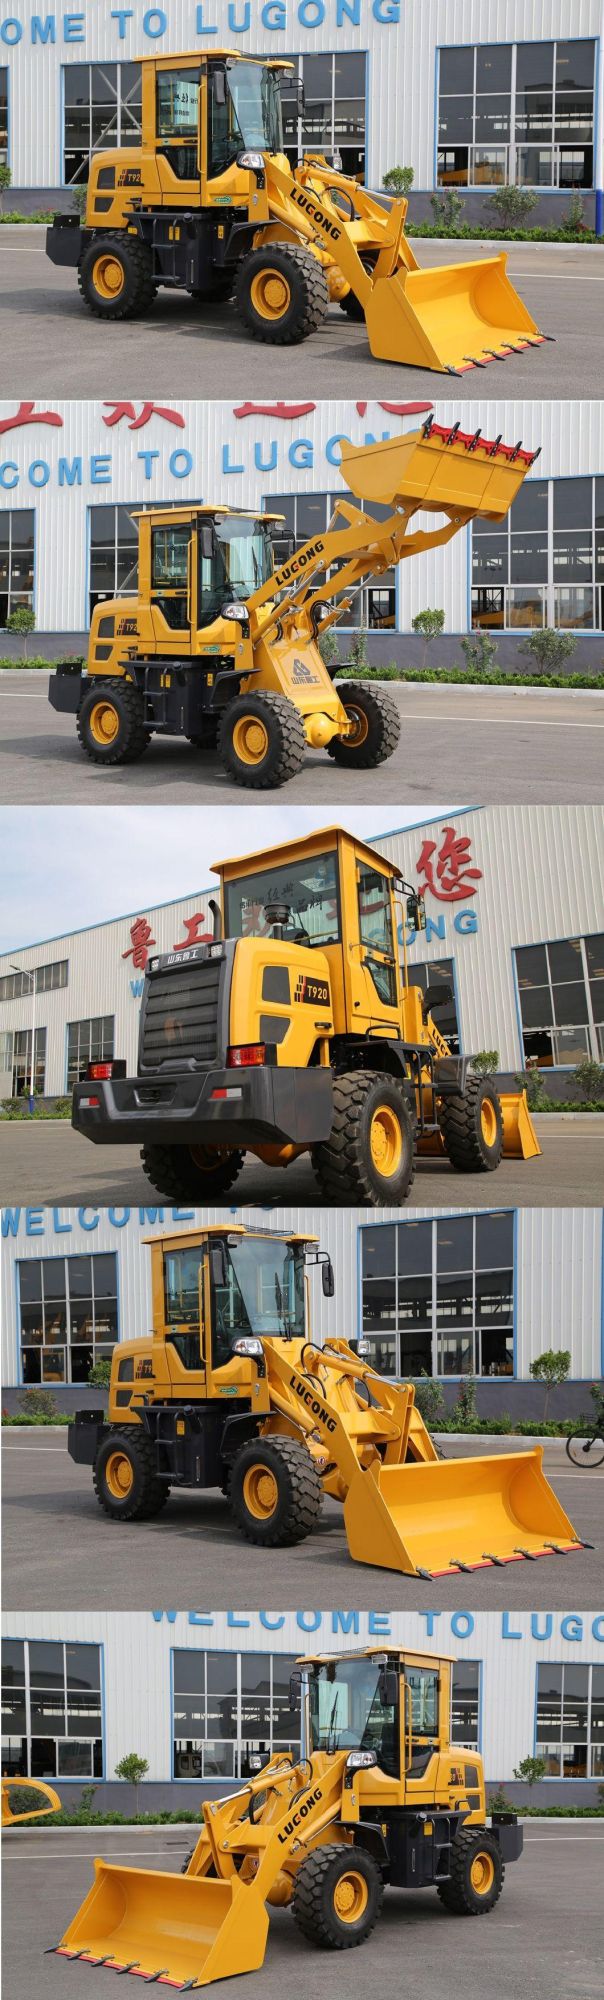 Lugong 1.5 Ton Compact Front End Wheel Loader with Multifunction